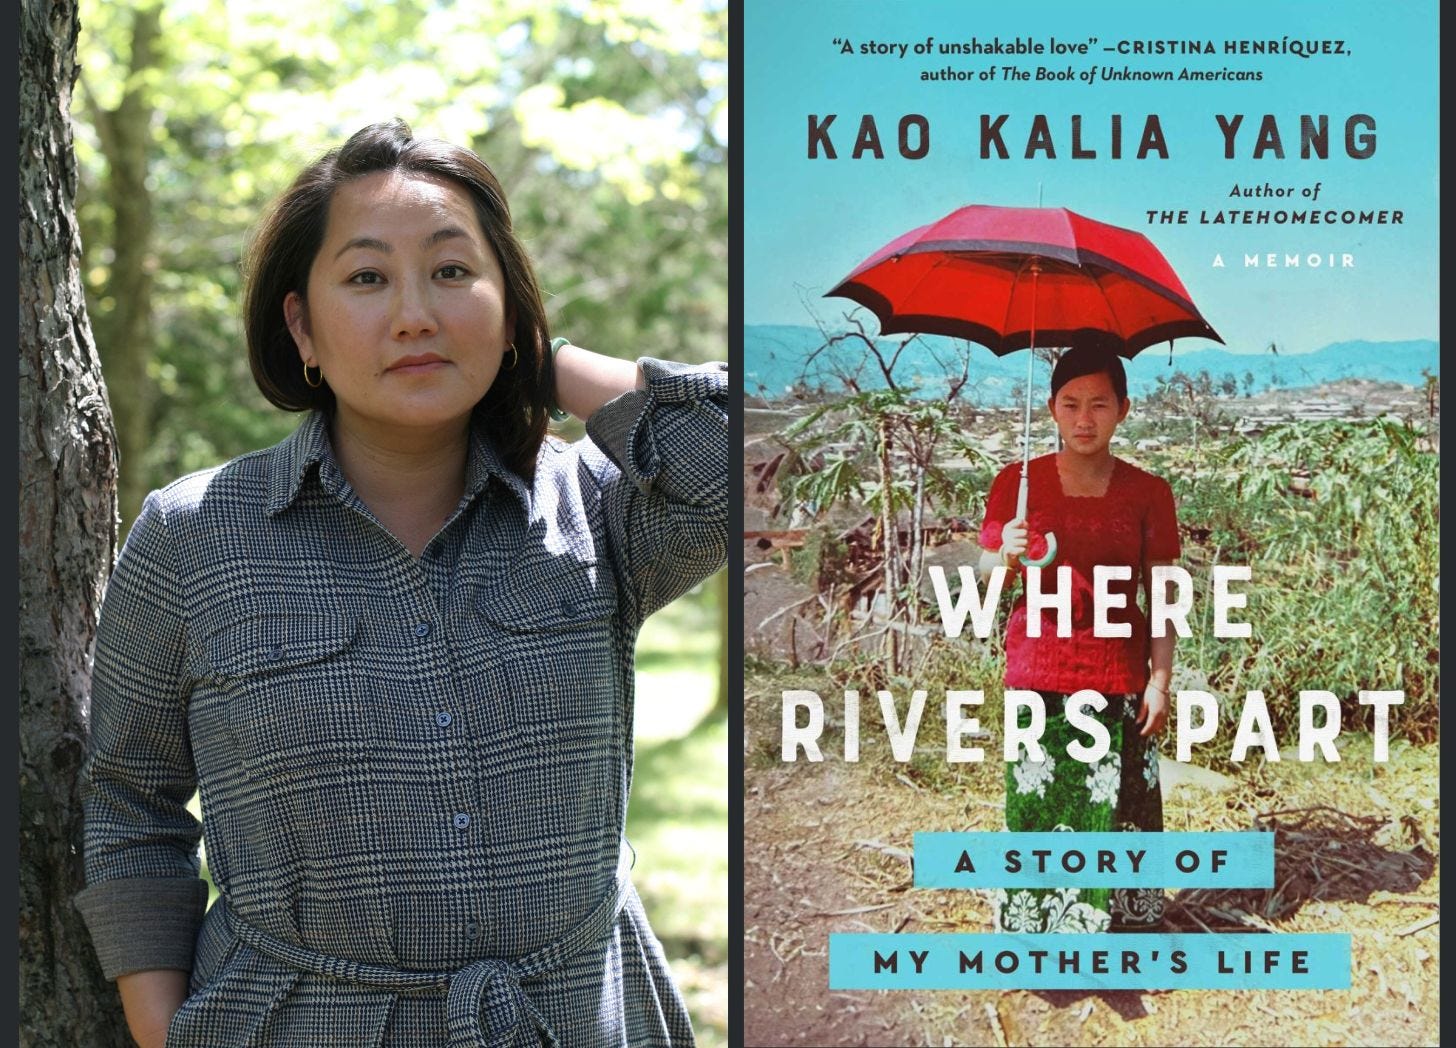 Kao Kalia Yang with the cover of her new book Where Rivers Part